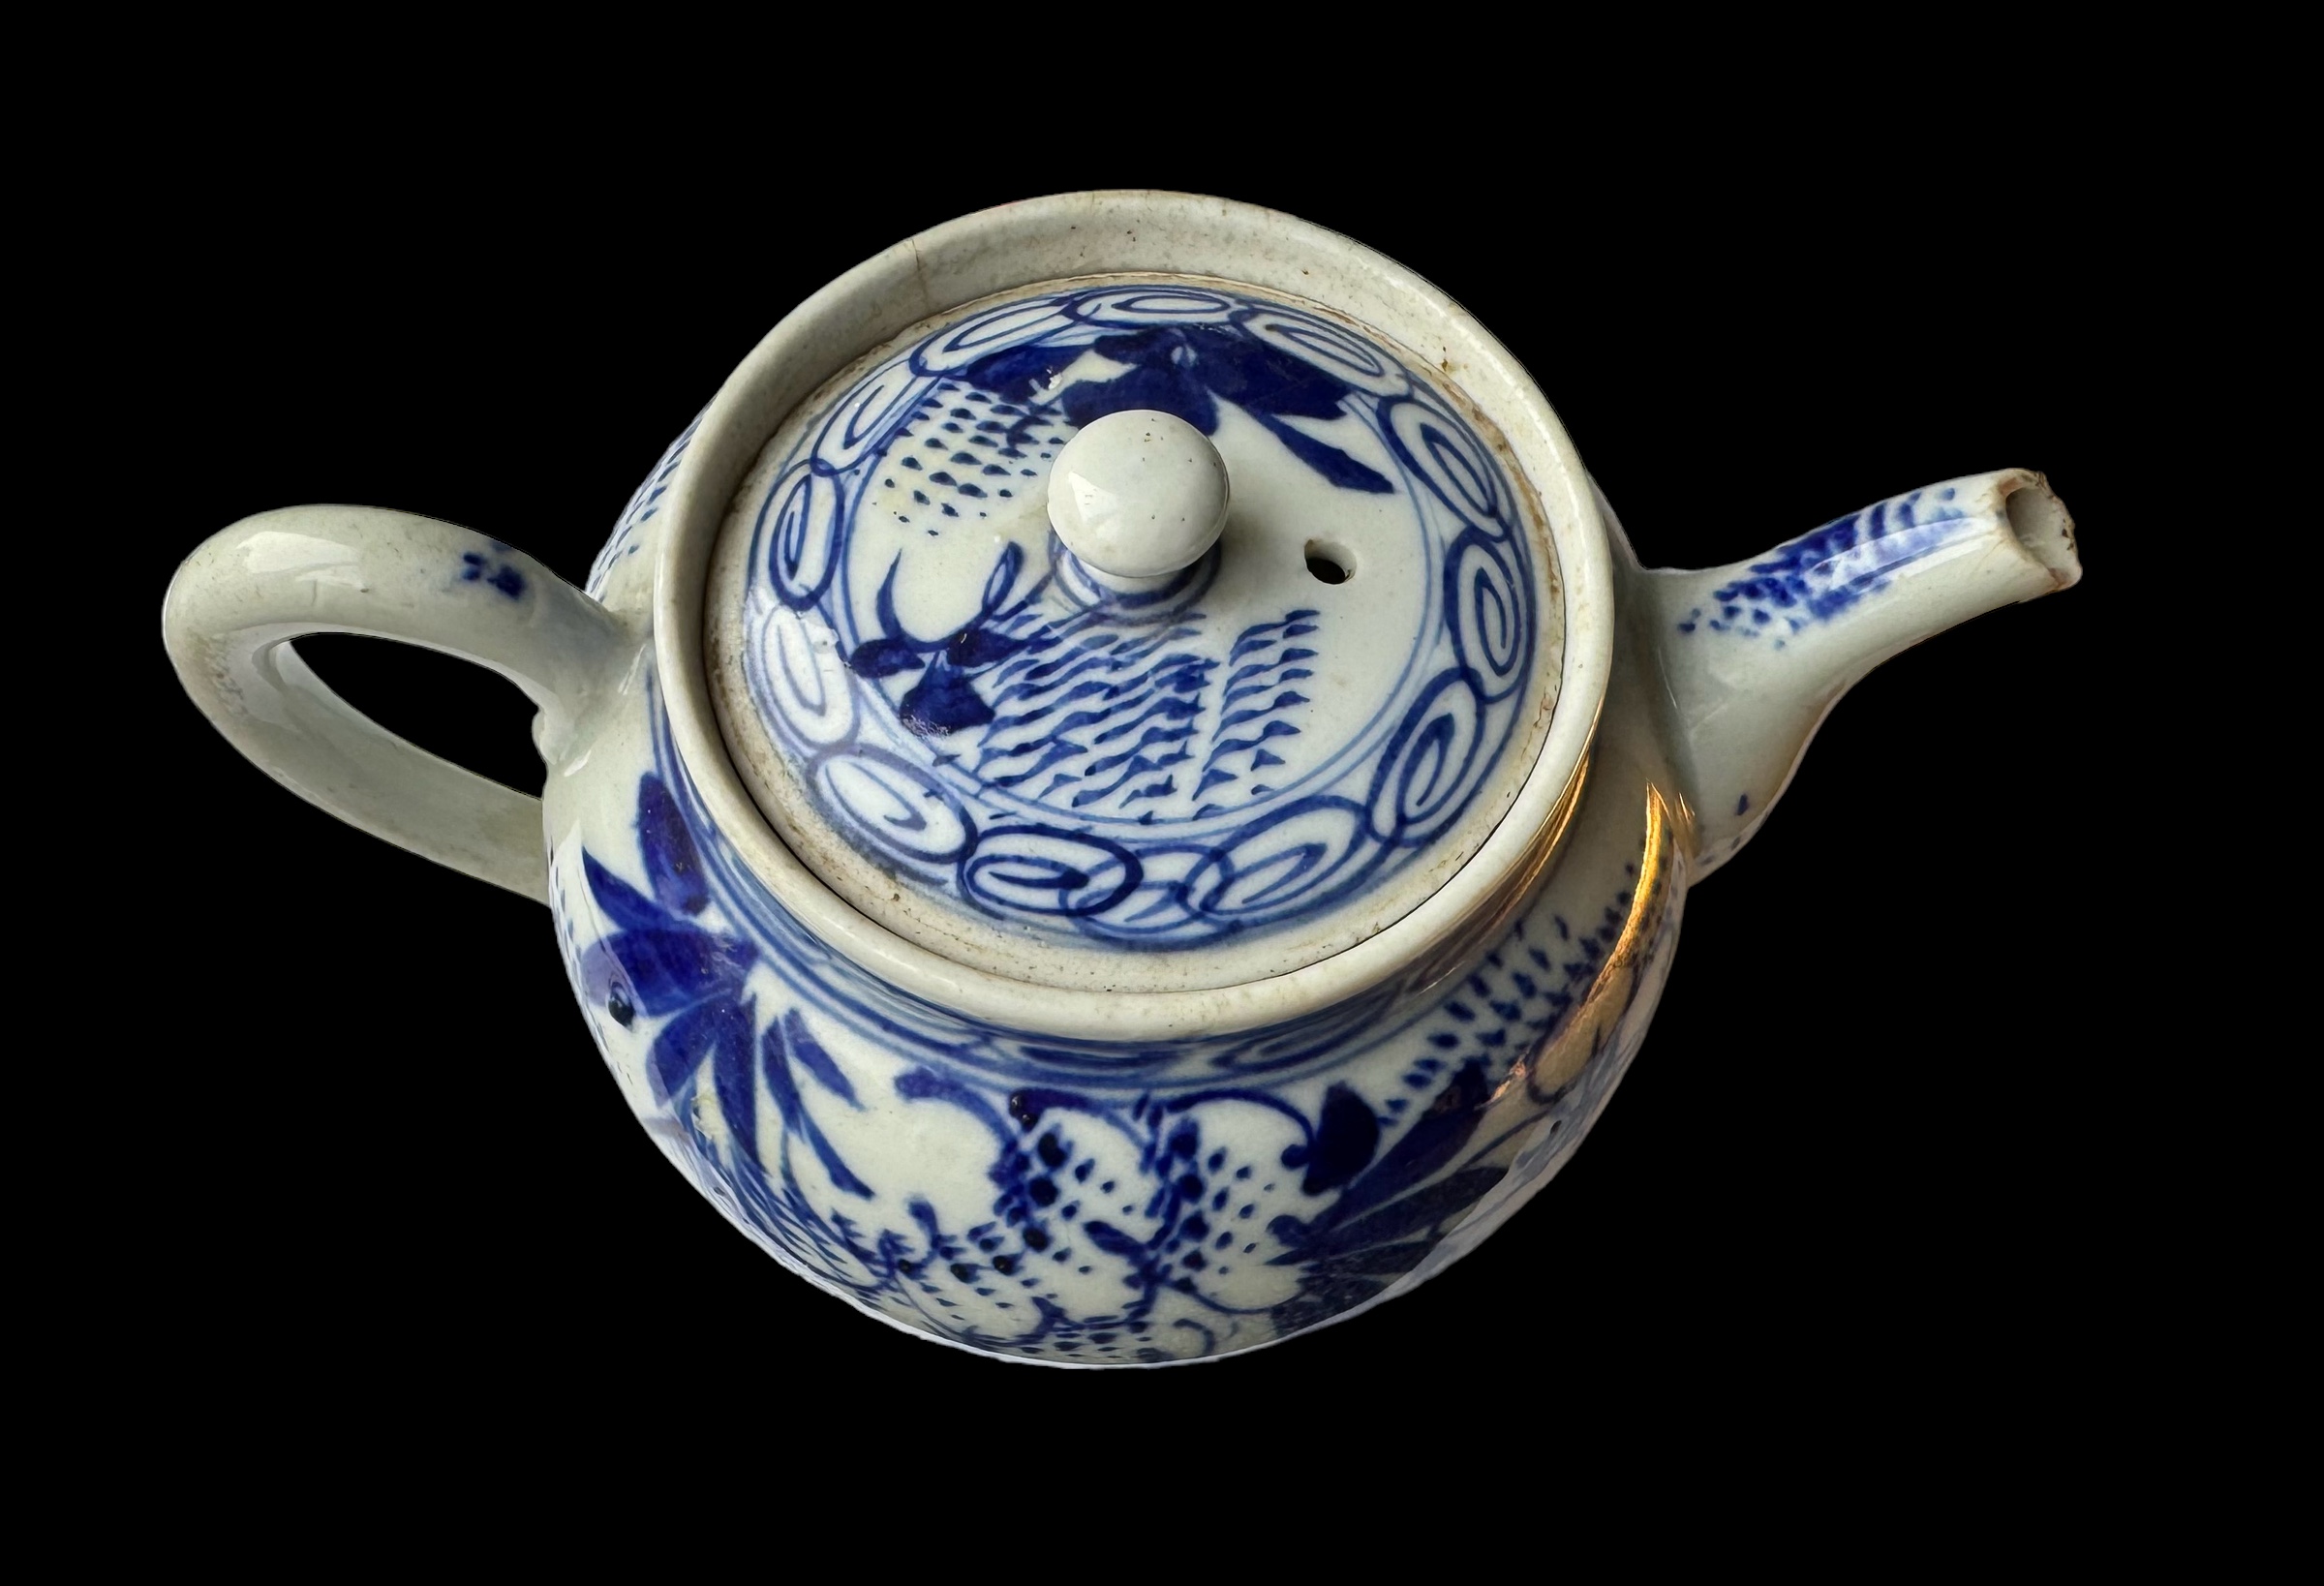 Antique Chinese Porcelain Teapot 17th-18th Century - Image 2 of 5